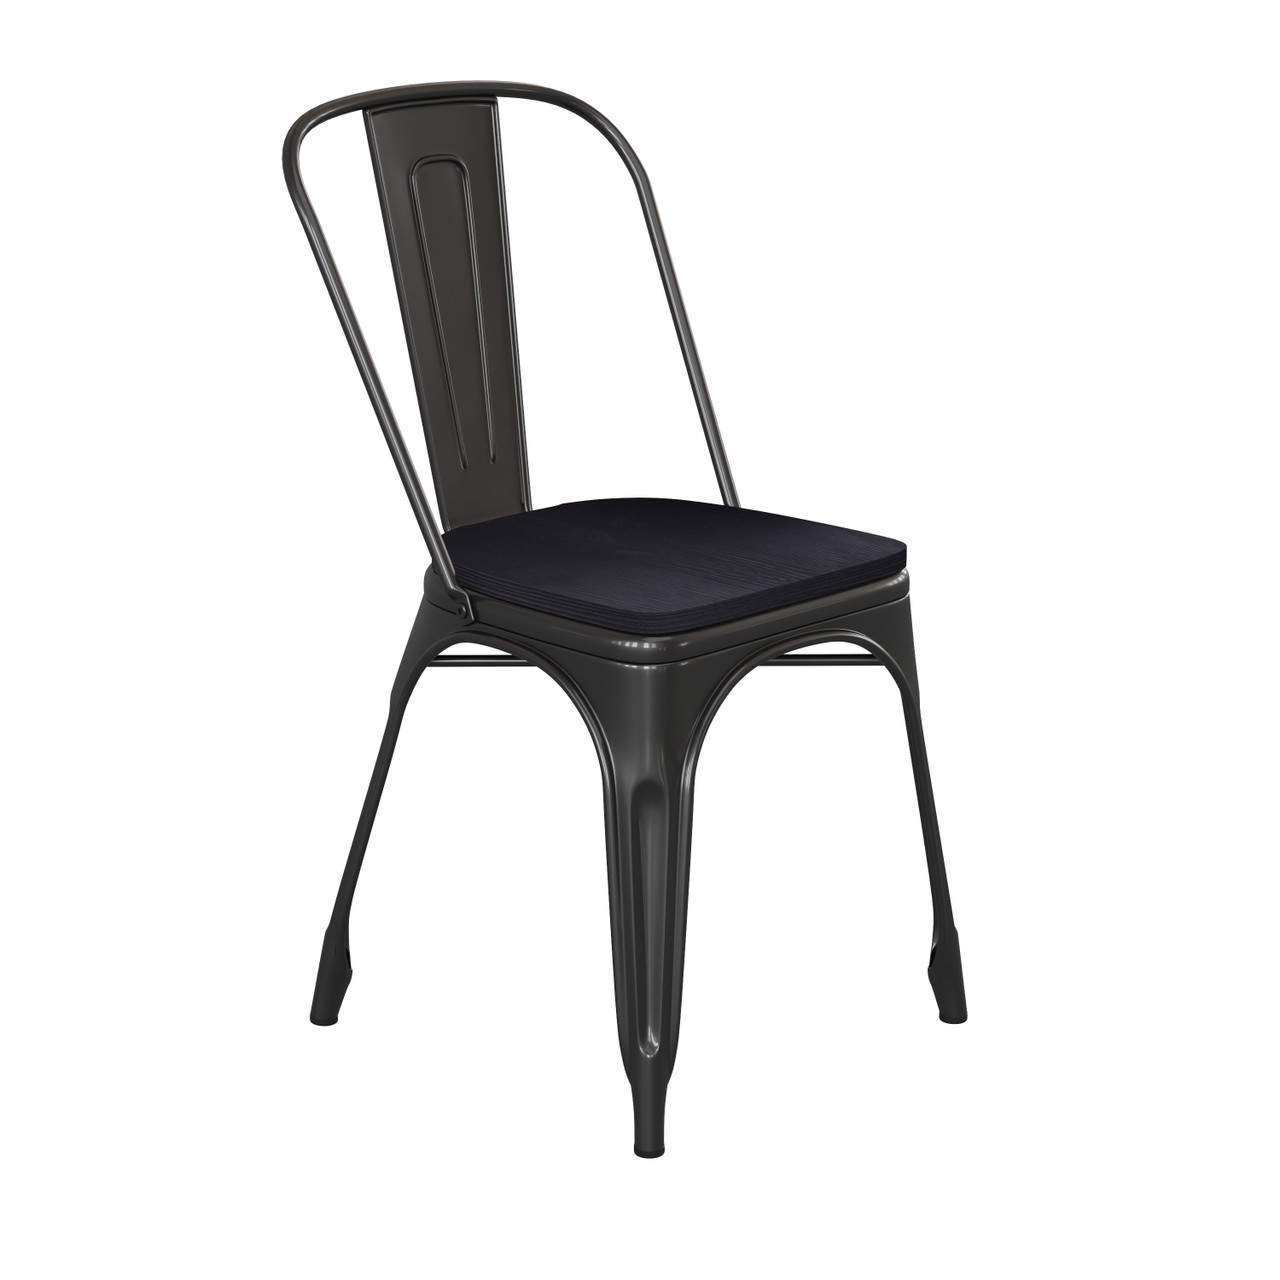 Flash Furniture Perry Commercial Grade Black Metal Indoor-Outdoor Stackable Chair w/ Black Poly Resin Wood Seat, Model# CH-31230-BK-PL1B-GG